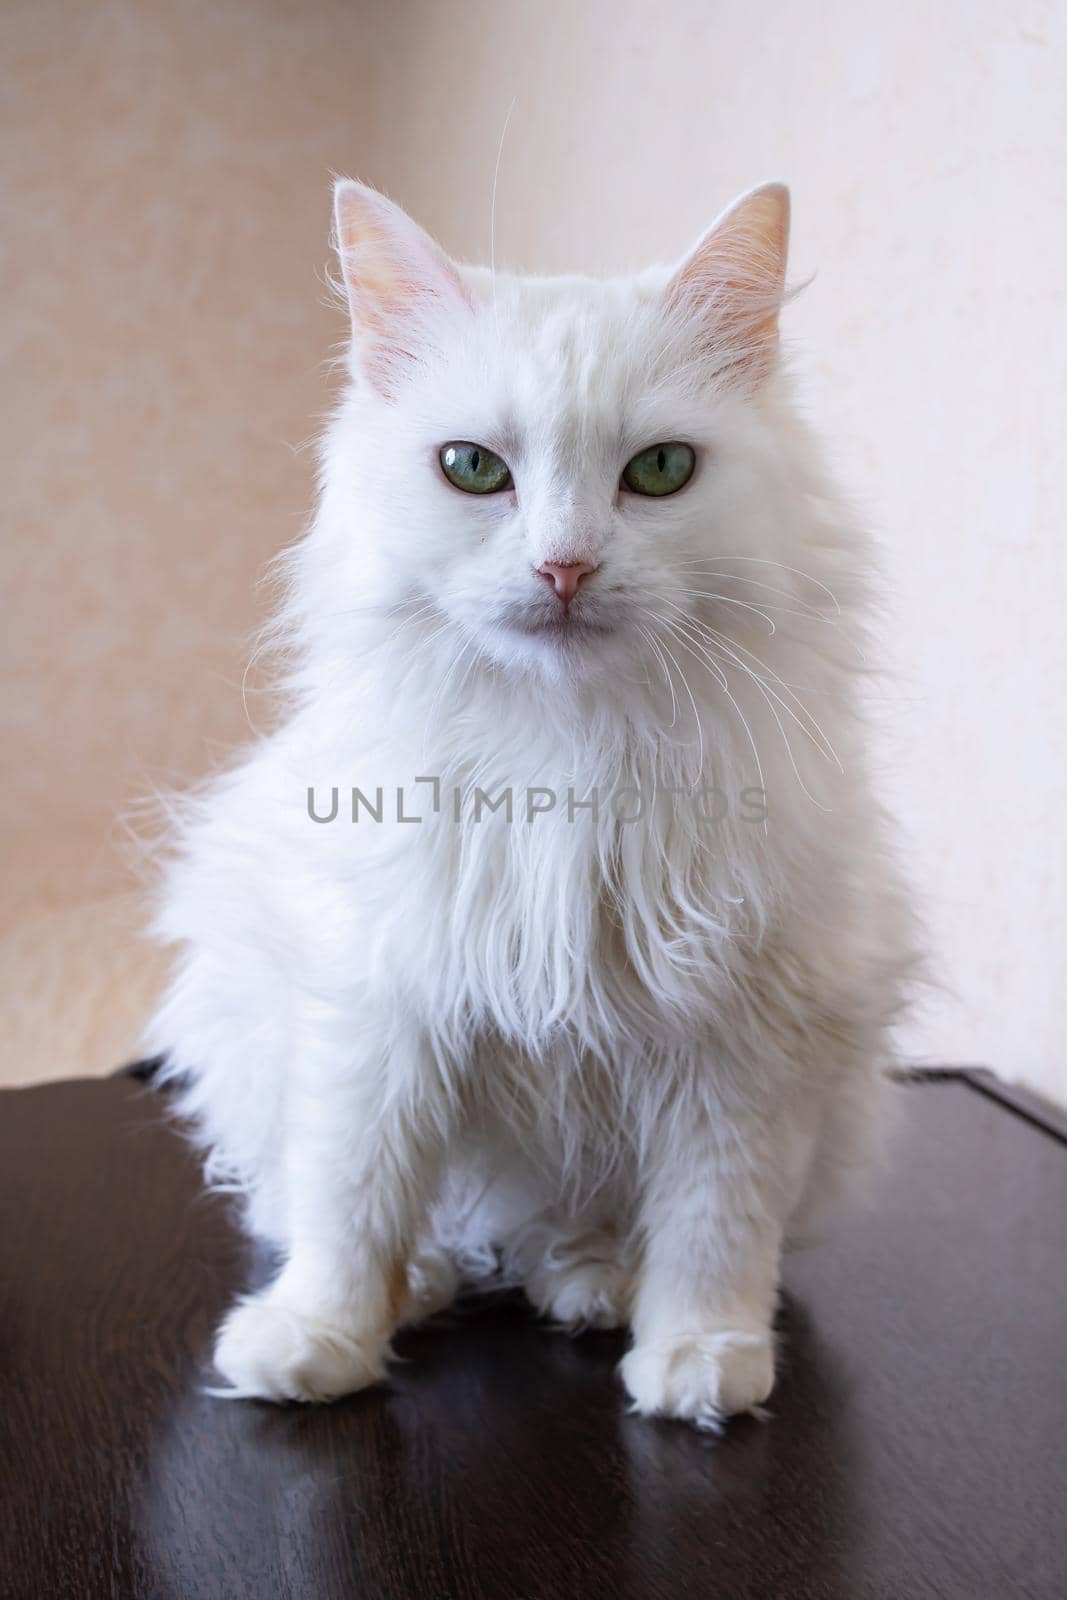 White fluffy cat sitting on a table close up